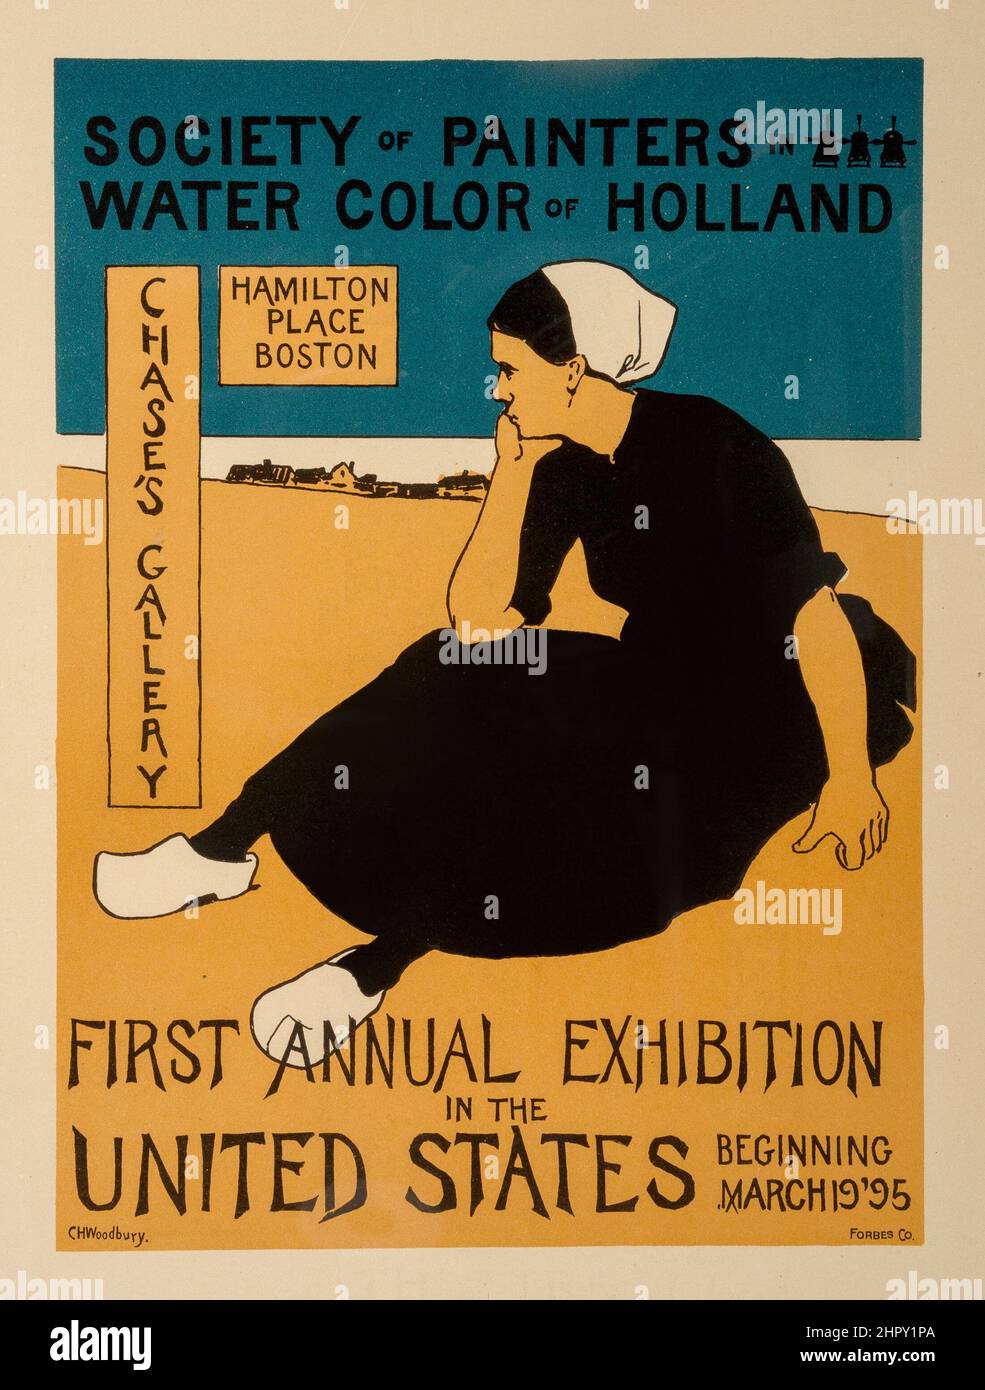 Charles Herbert Woodbury (1864-1940) Society of Painters in Water Color of Holland (from Les Maitres de L'Affiche) c 1895. Stock Photo